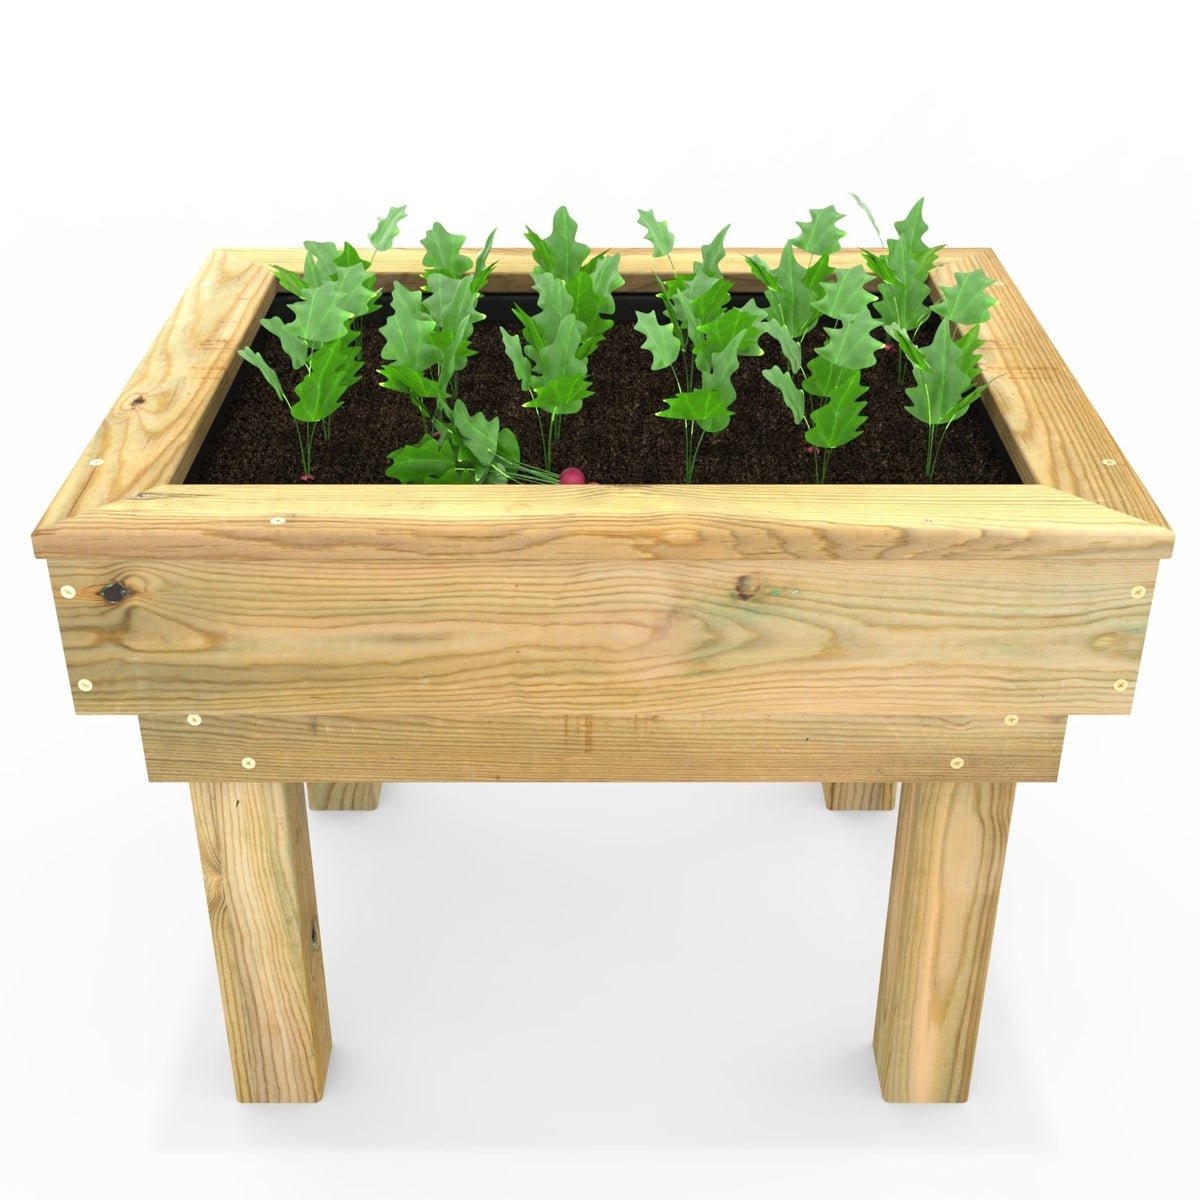 Rebo Wooden Learn and Grow Single Planter